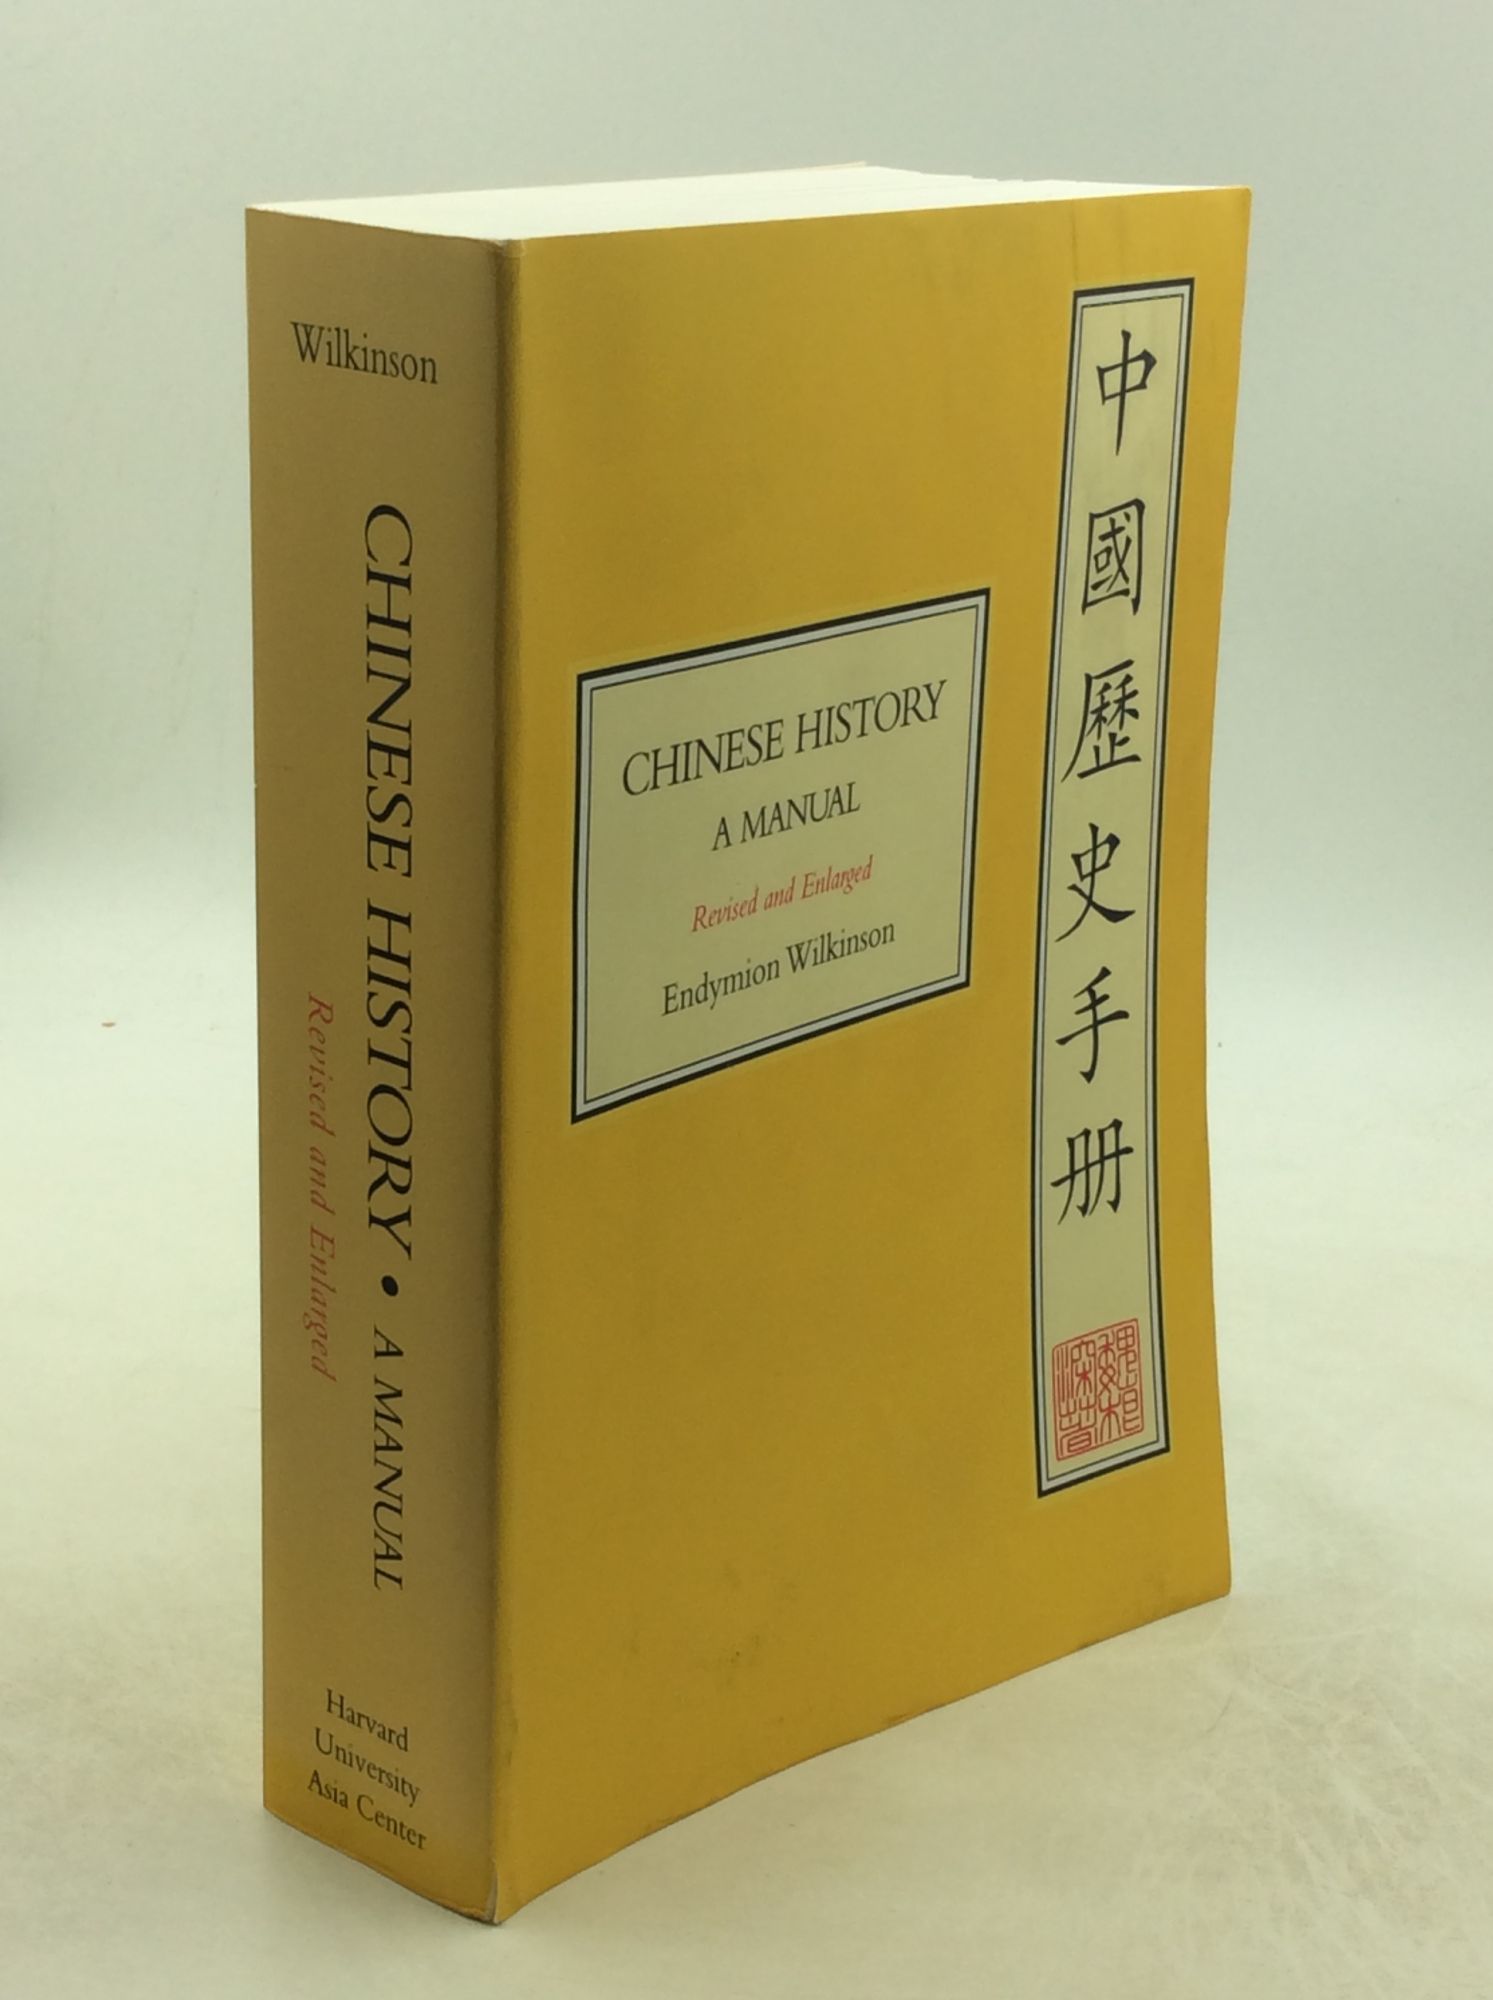 CHINESE HISTORY: A Manual - Endymion Wilkinson